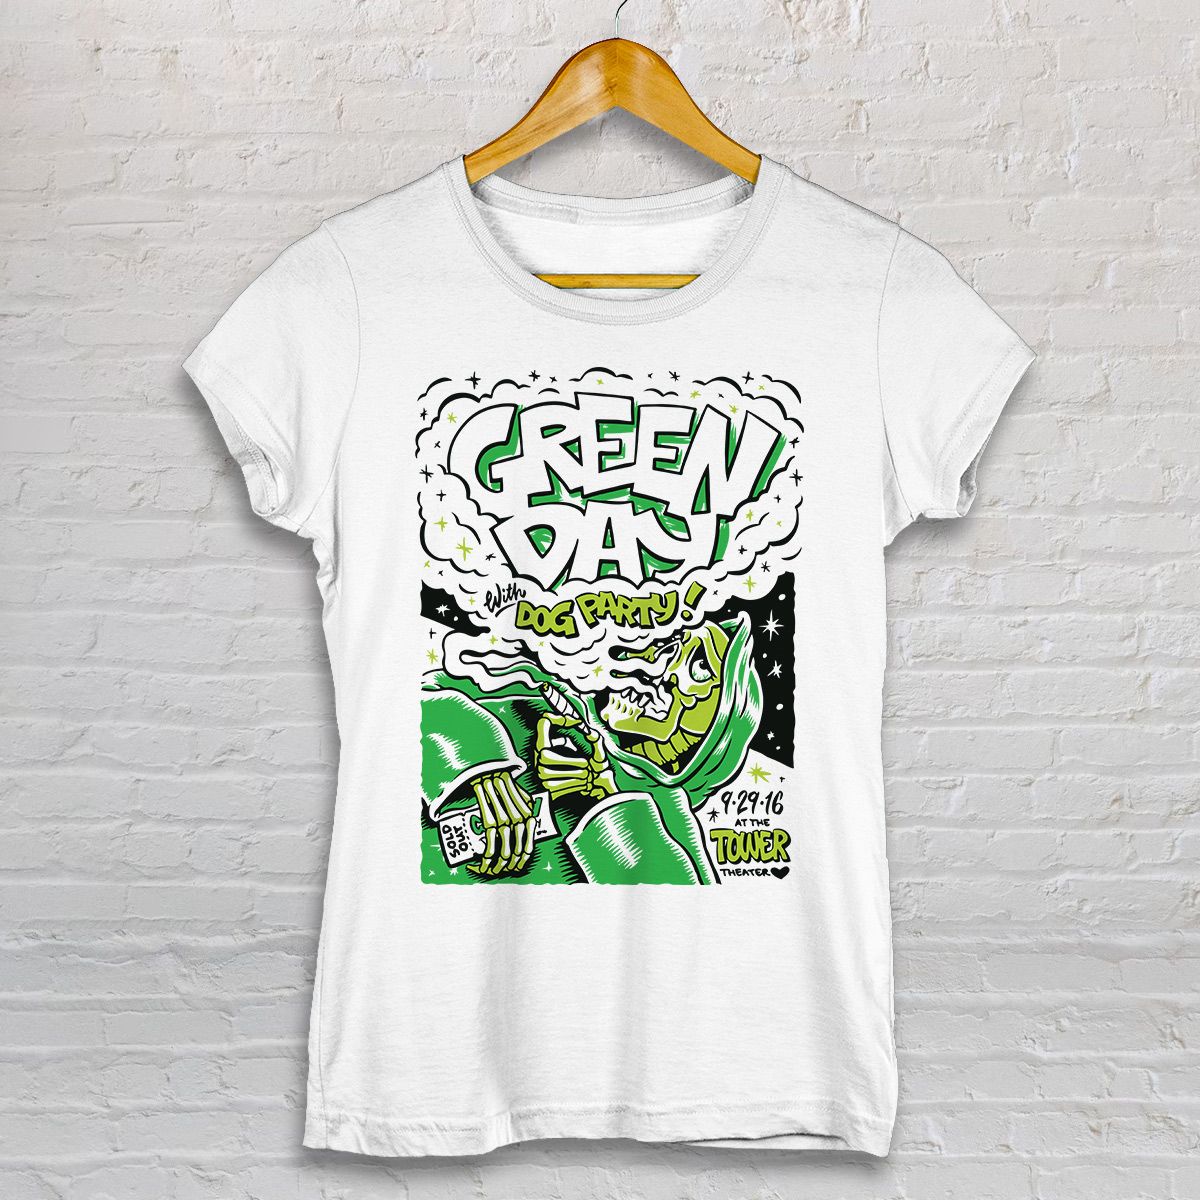 Nome do produto: BABY LOOK - GREEN DAY - TOWER THEATER